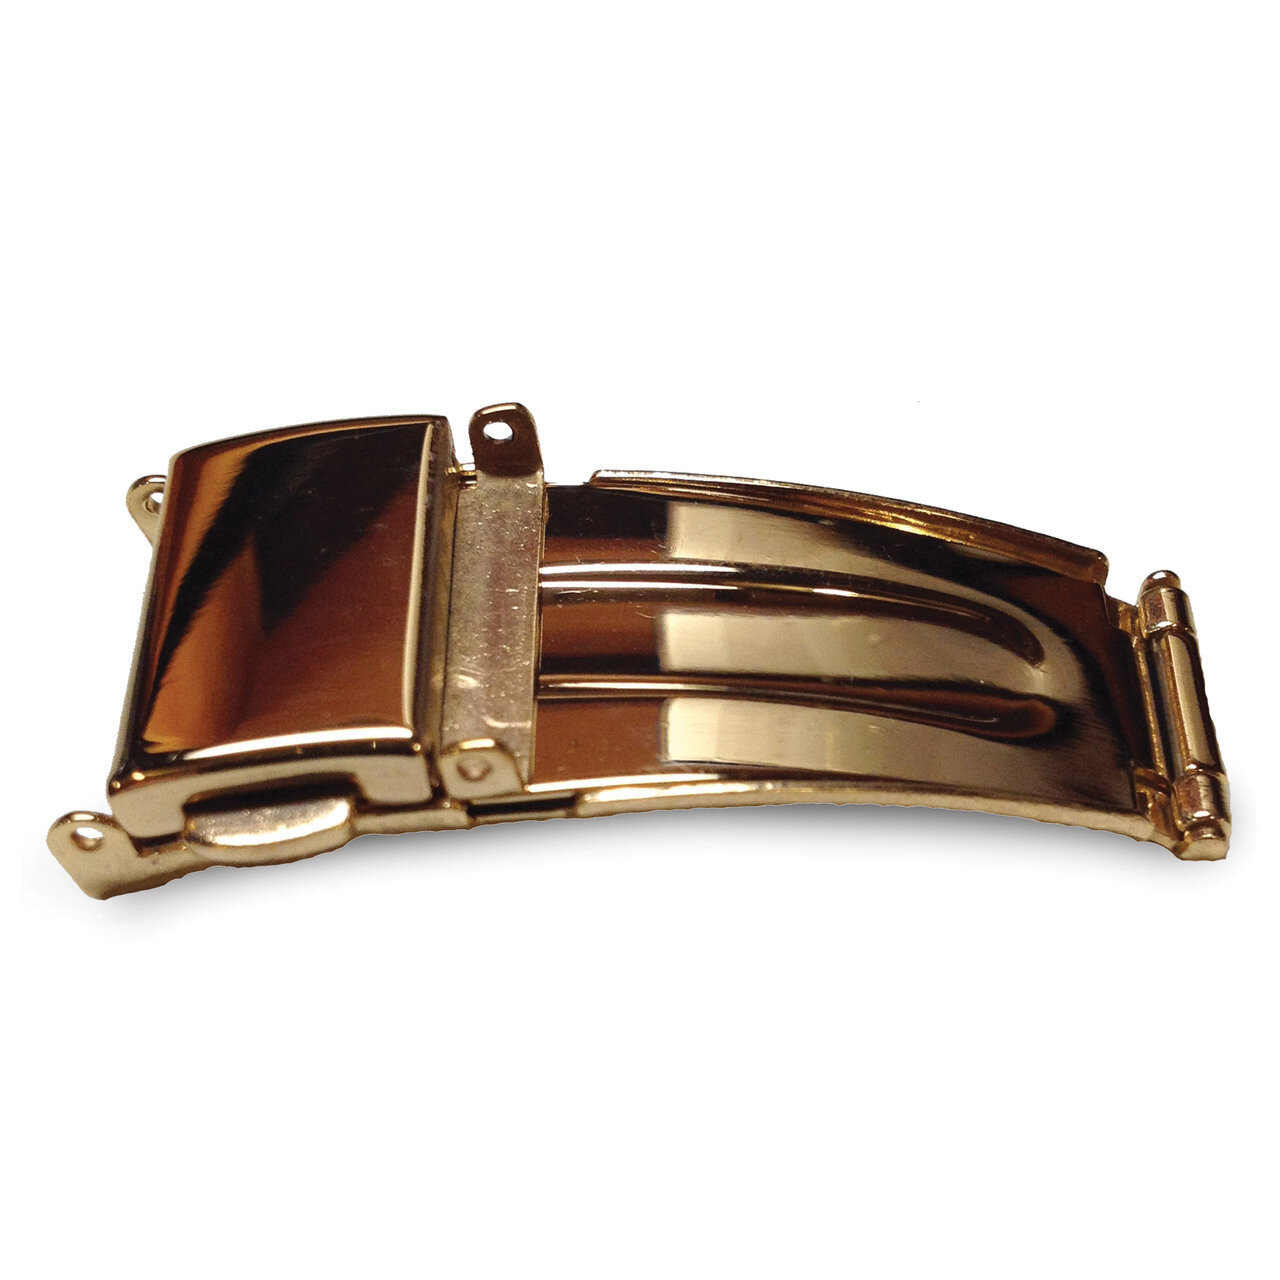 20mm Stainless Steel Dbl Press Tri-Fold Deployment Clasp 20 Inch Gold-tone FTL149Y-20